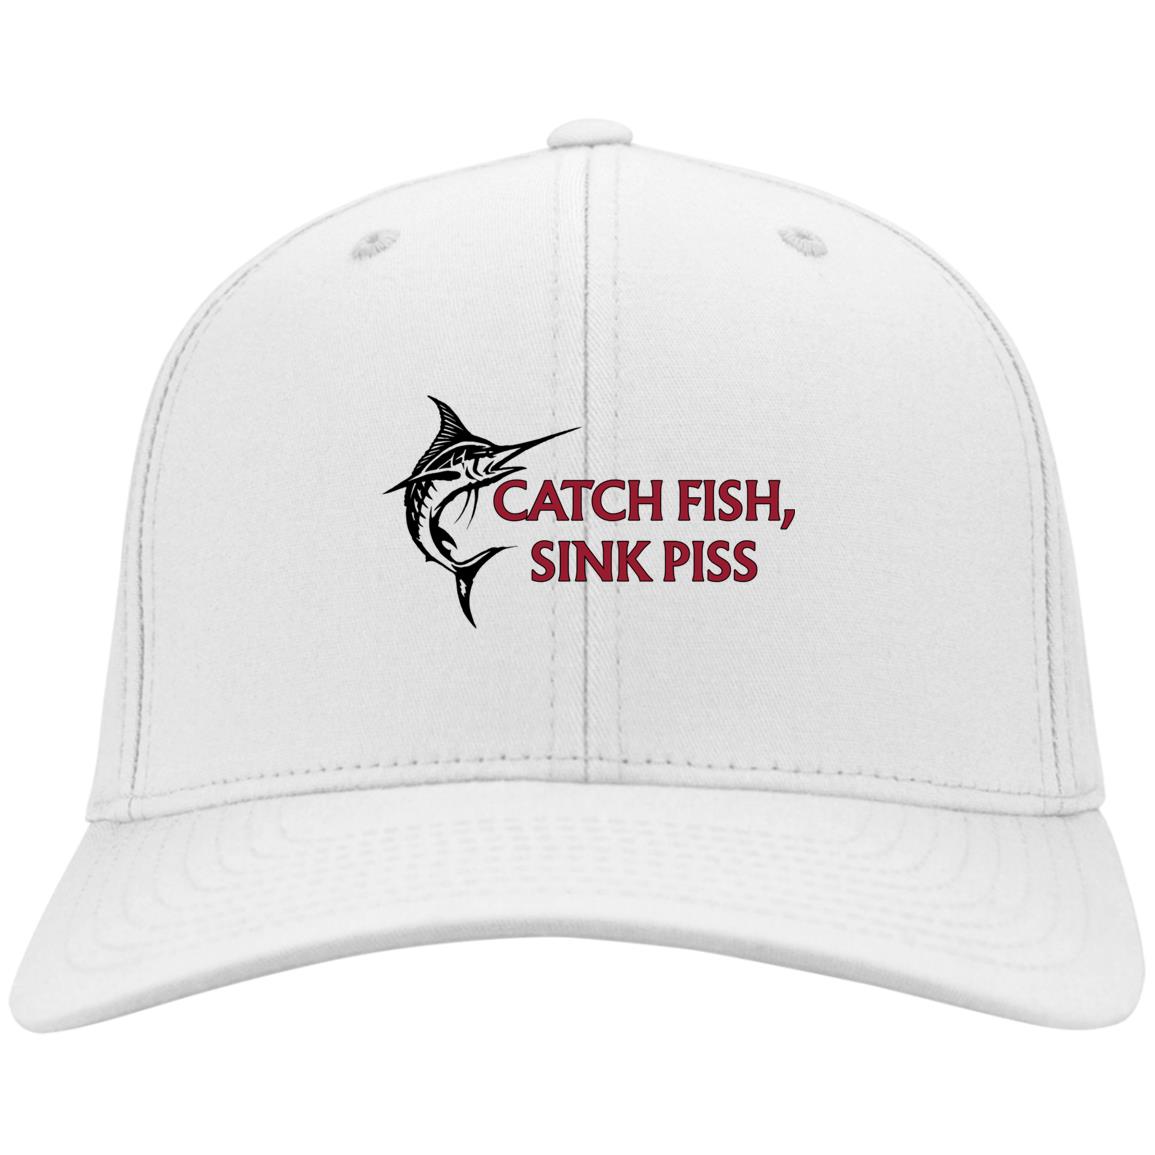 Catch Fish Sink Piss Hat 0sTees photo